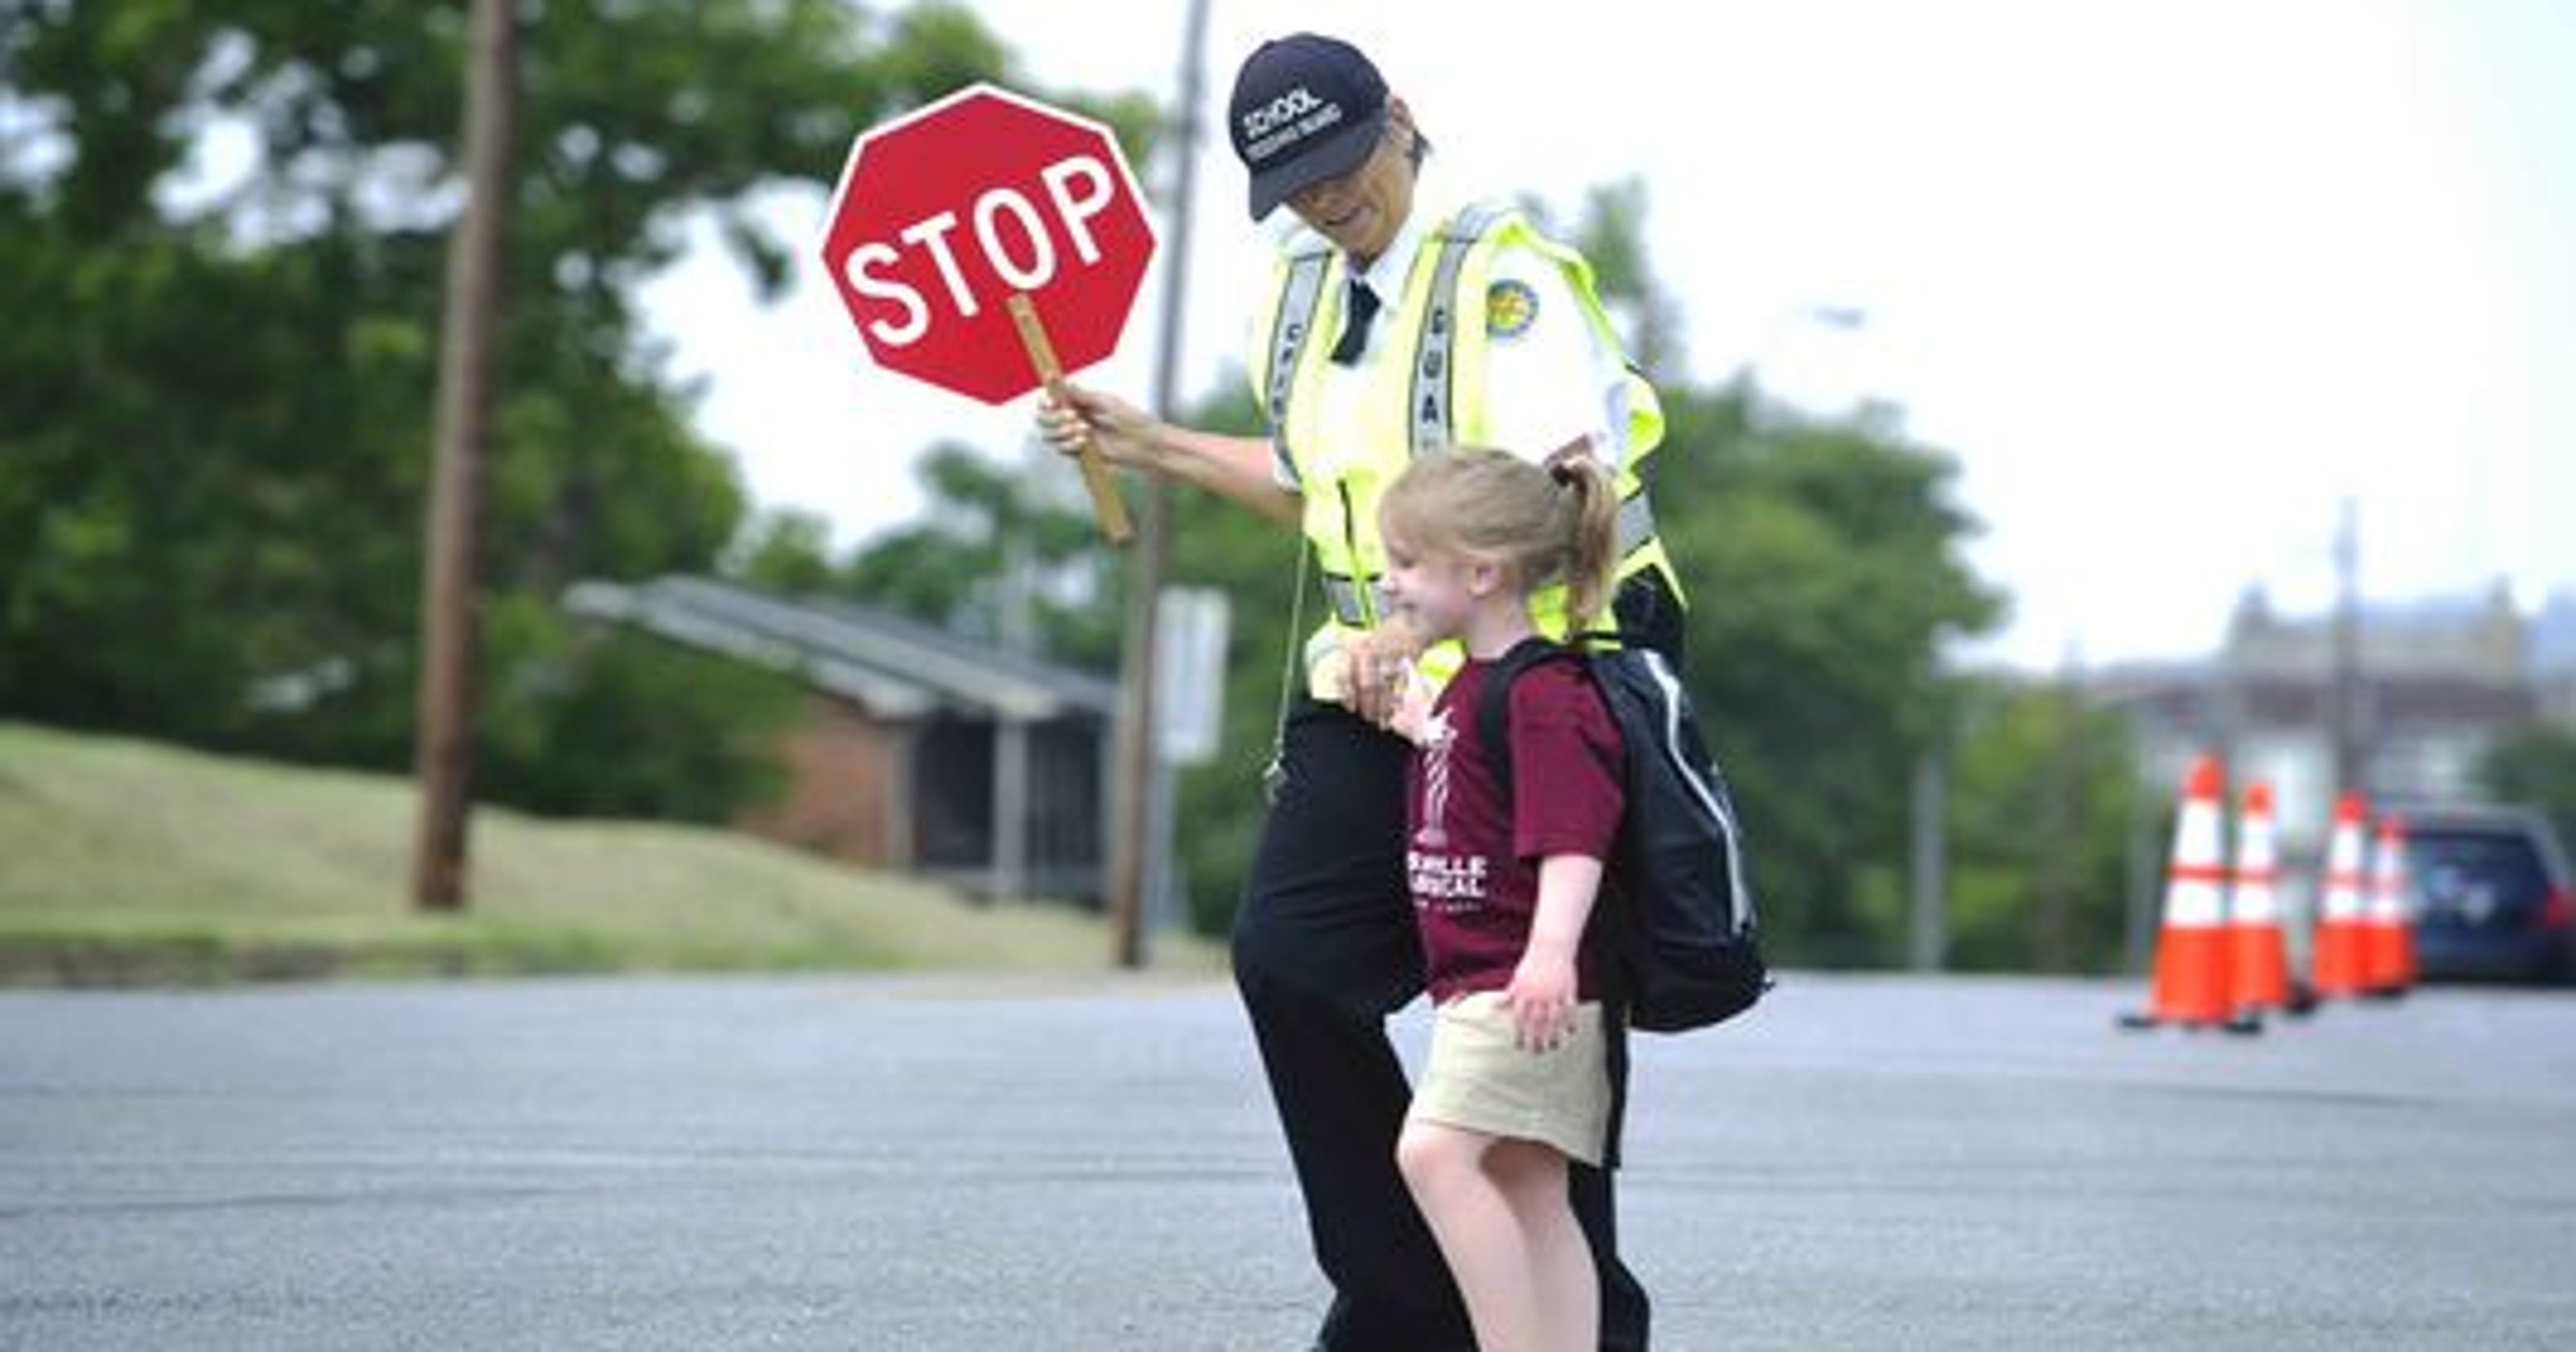 Police Looking To Hire Dozens Of School Crossing Guards